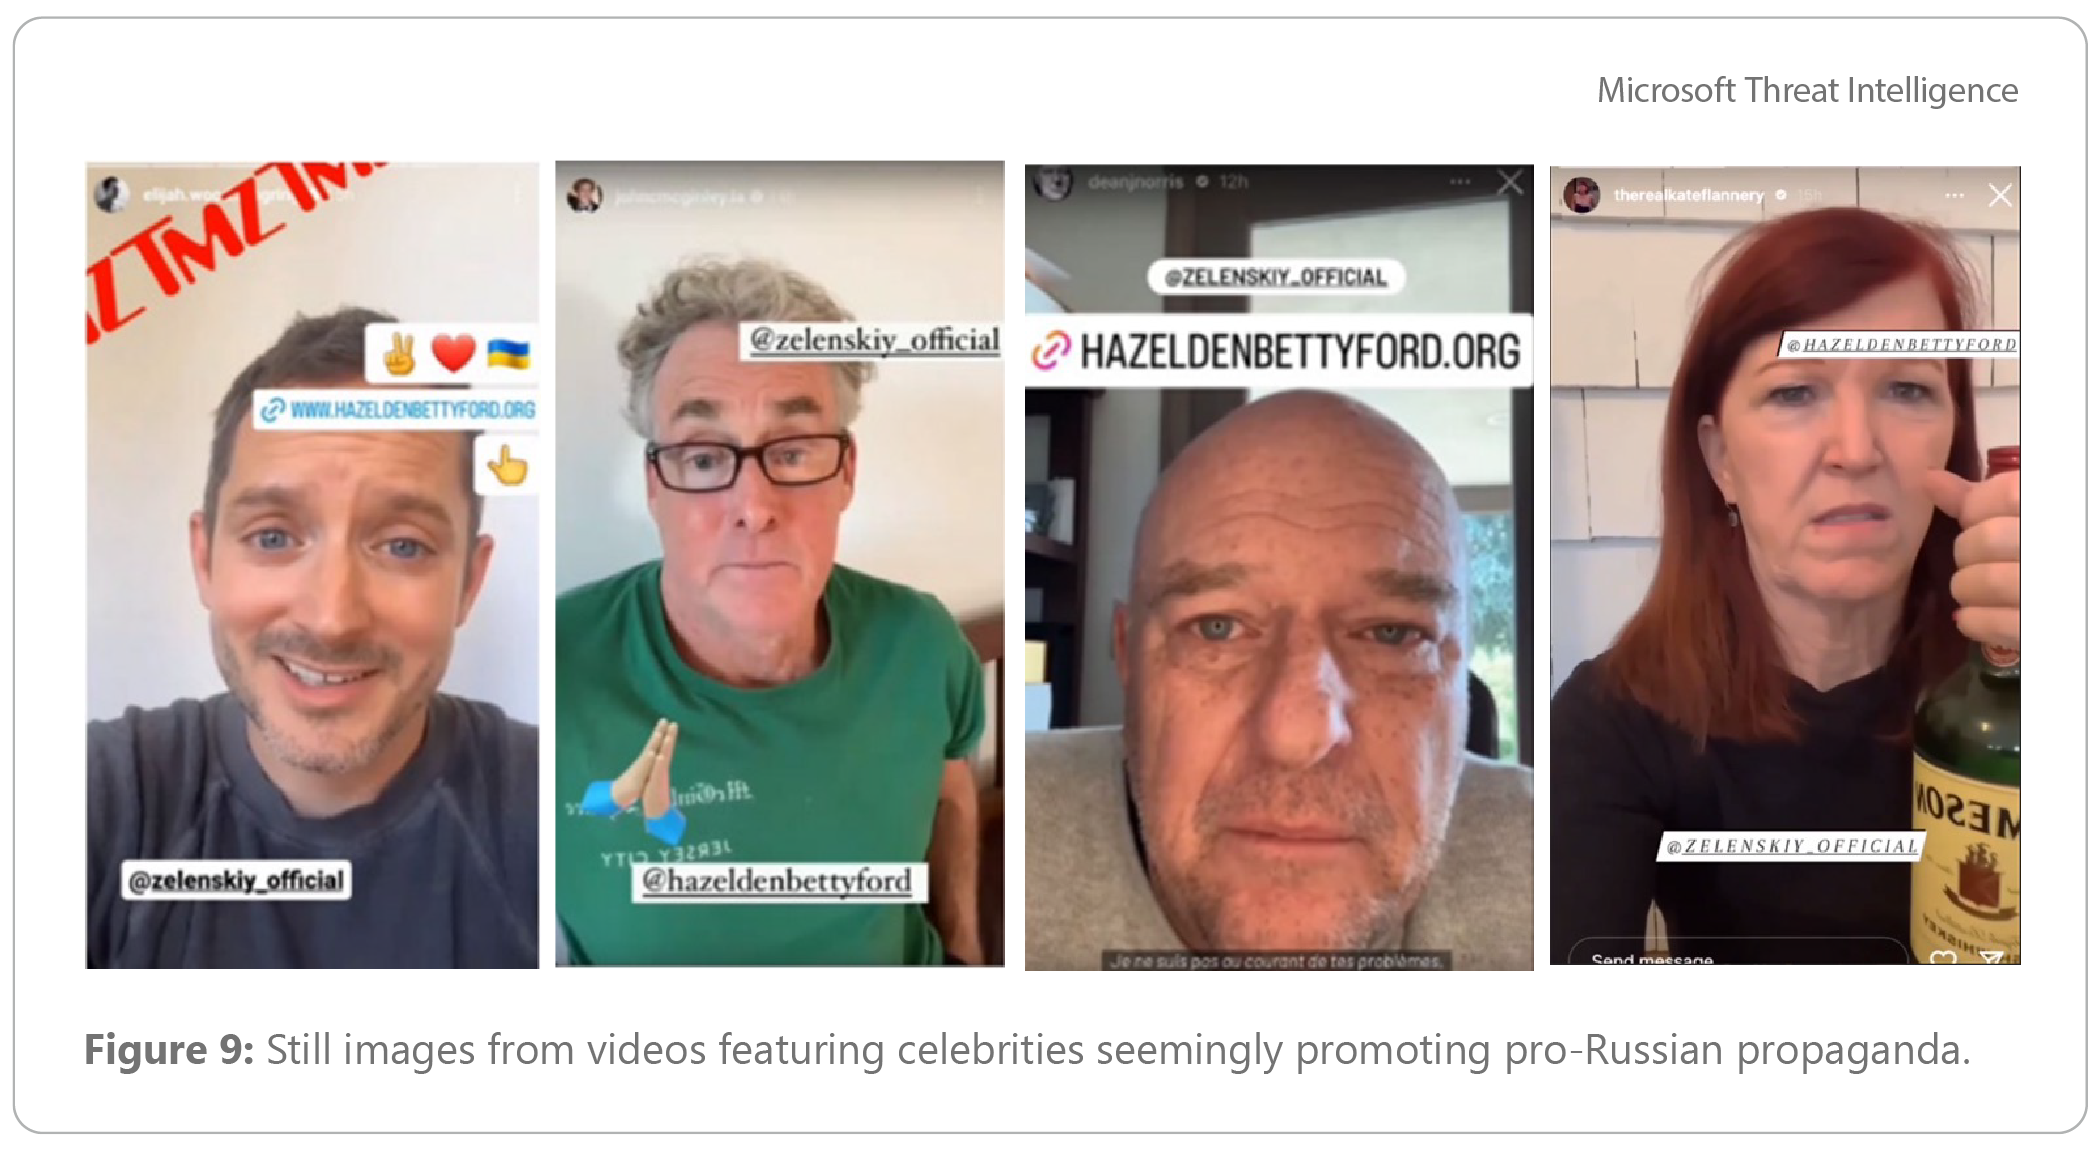 Four still images from videos featuring celebrities seemingly promoting pro-Russian propaganda.